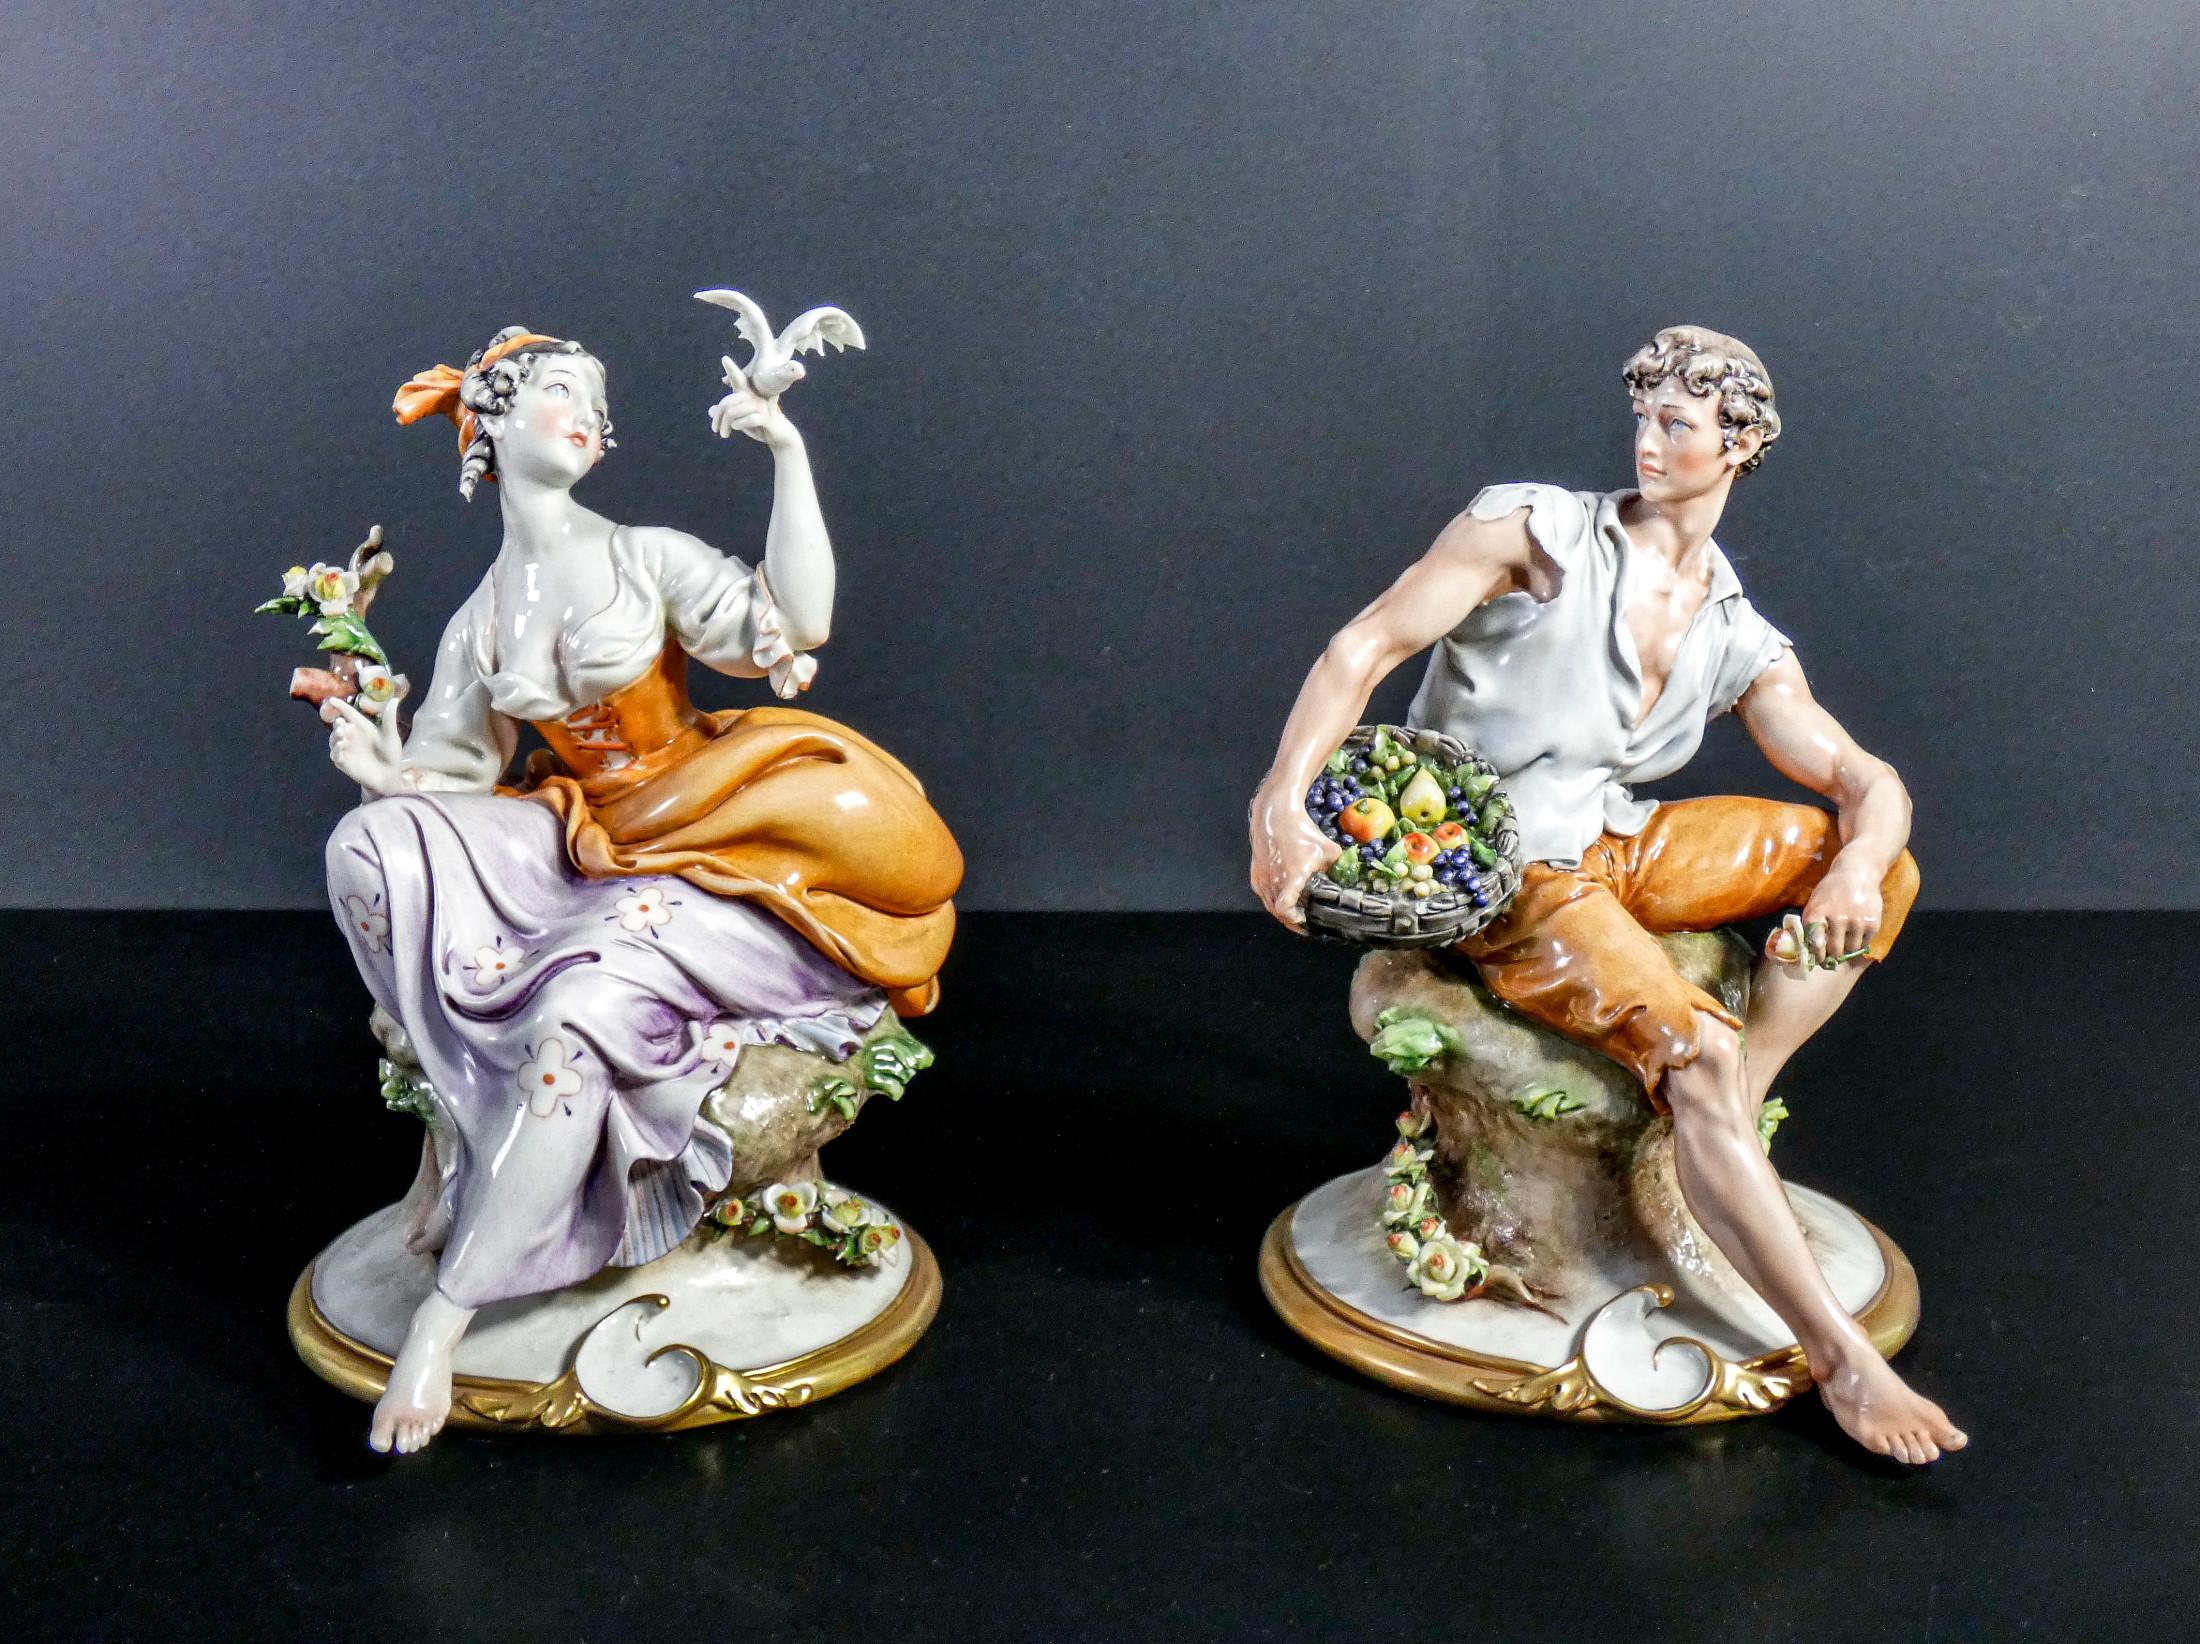 Pair of hand painted porcelain sculptures, signed Giuseppe CAPPÉ
